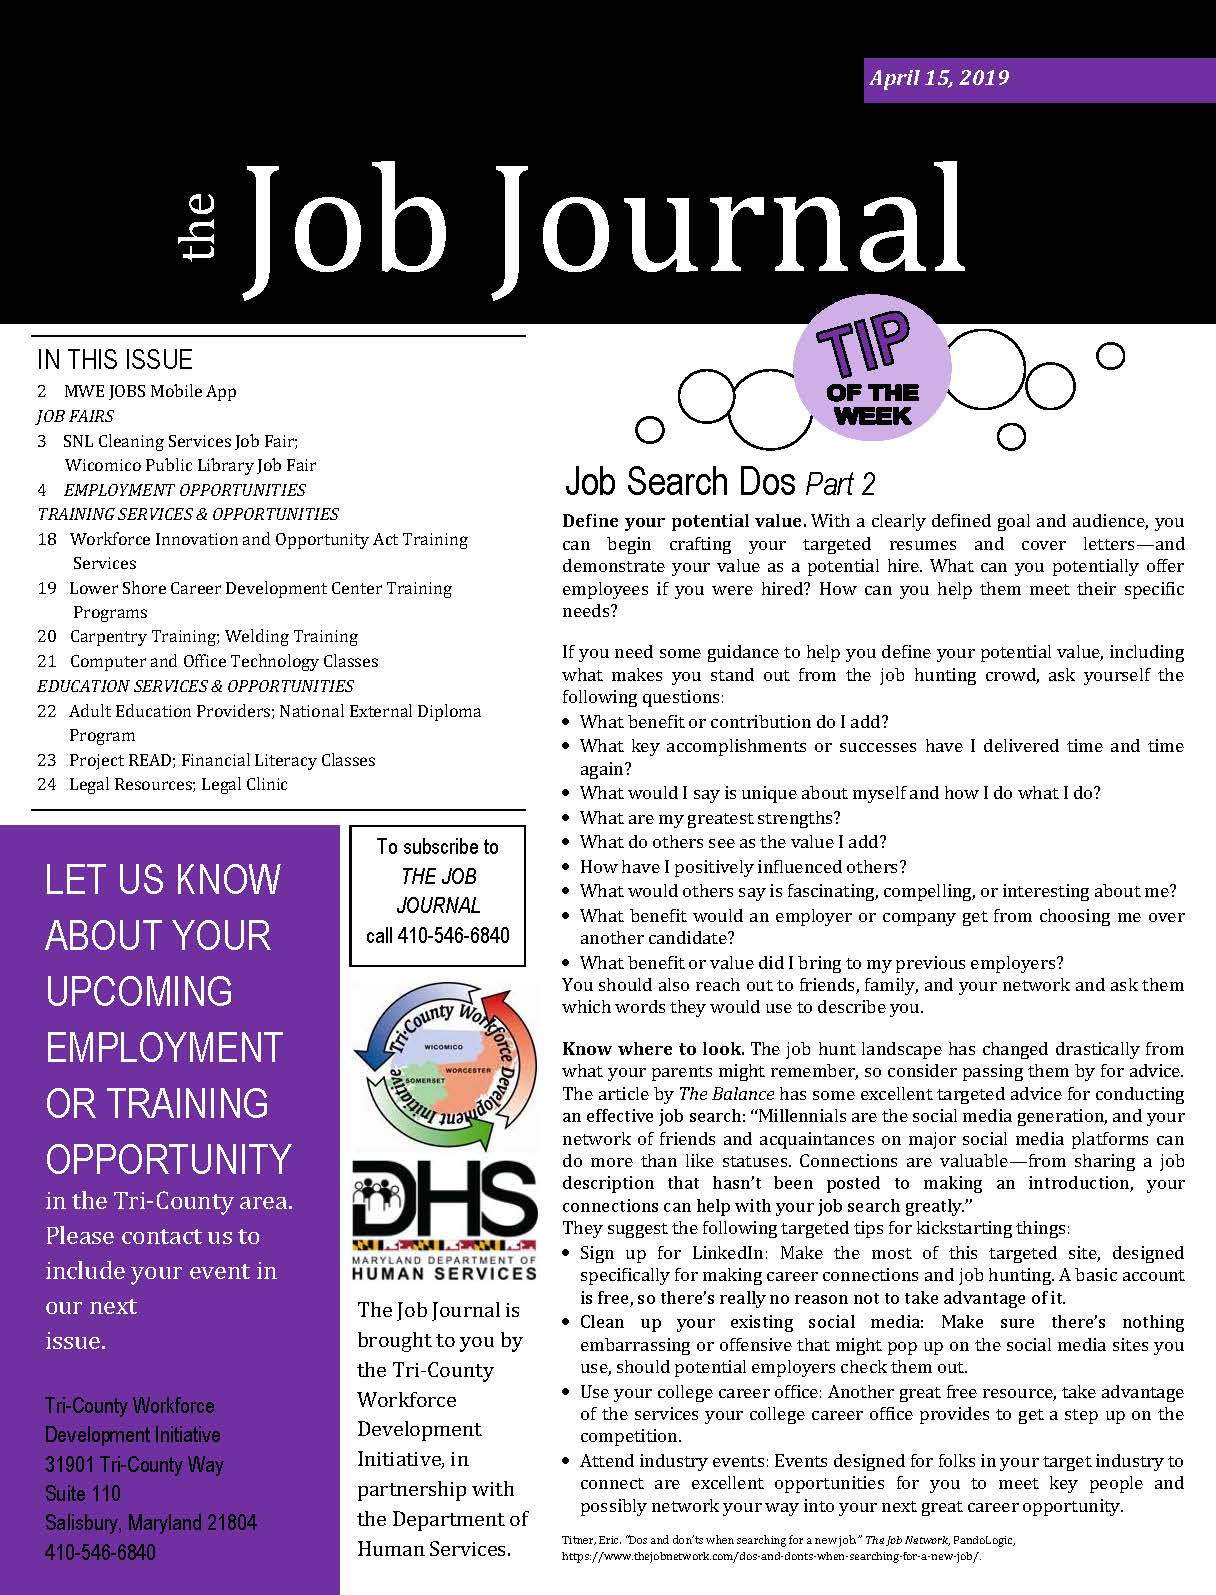 Front page of the April 15, 2019 Job Journal